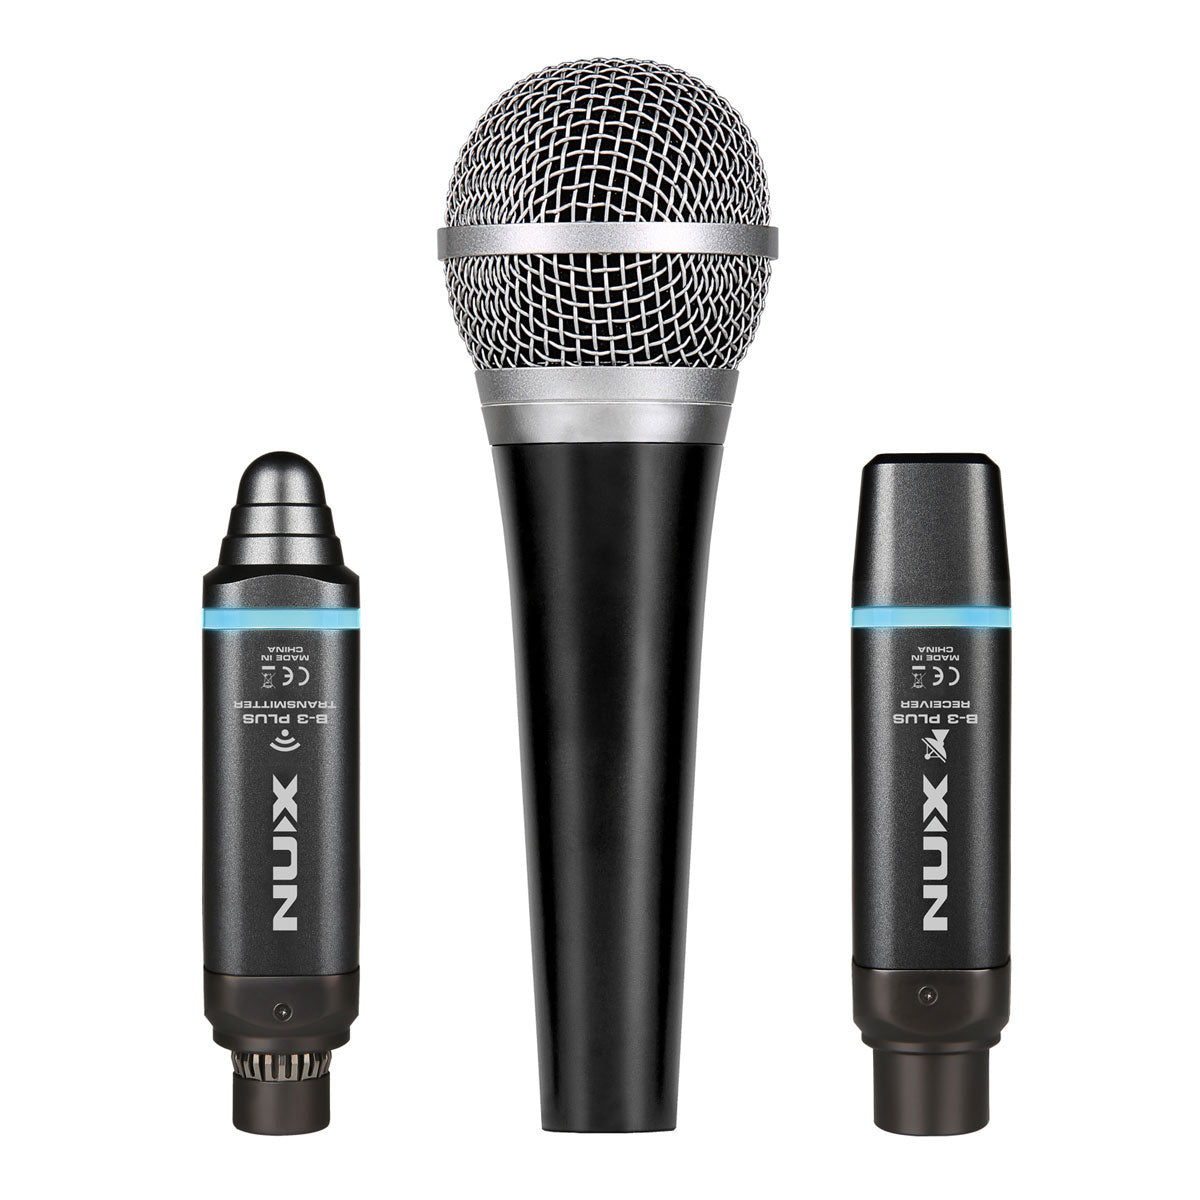 Nux B-3 Plus Wireless Microphone Connections